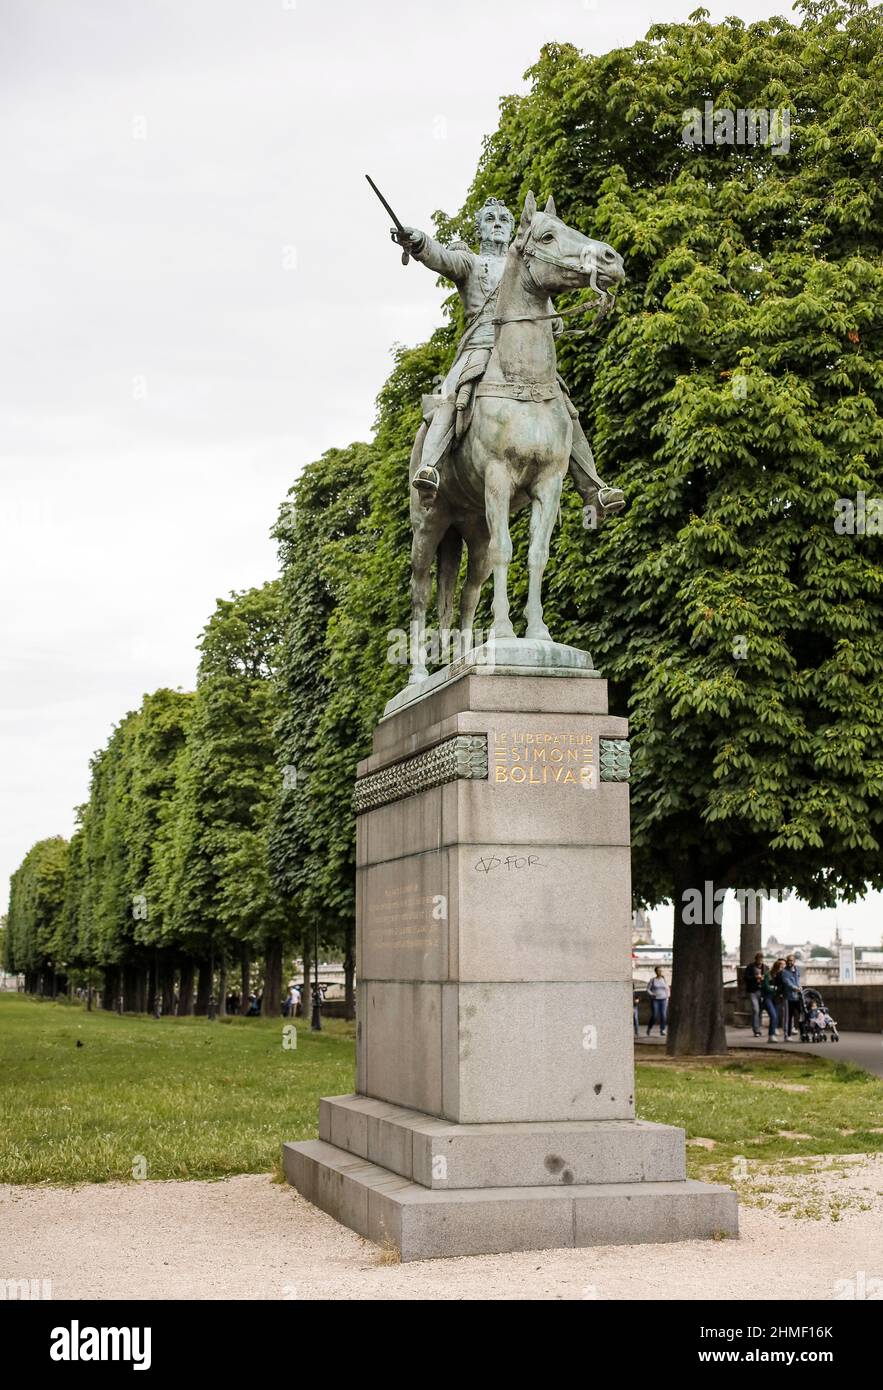 Statue of South American Liberation leader Simon Bolivar by Emmanuel Fremiet in Cours la Reine promenade and park in Paris, France Stock Photo